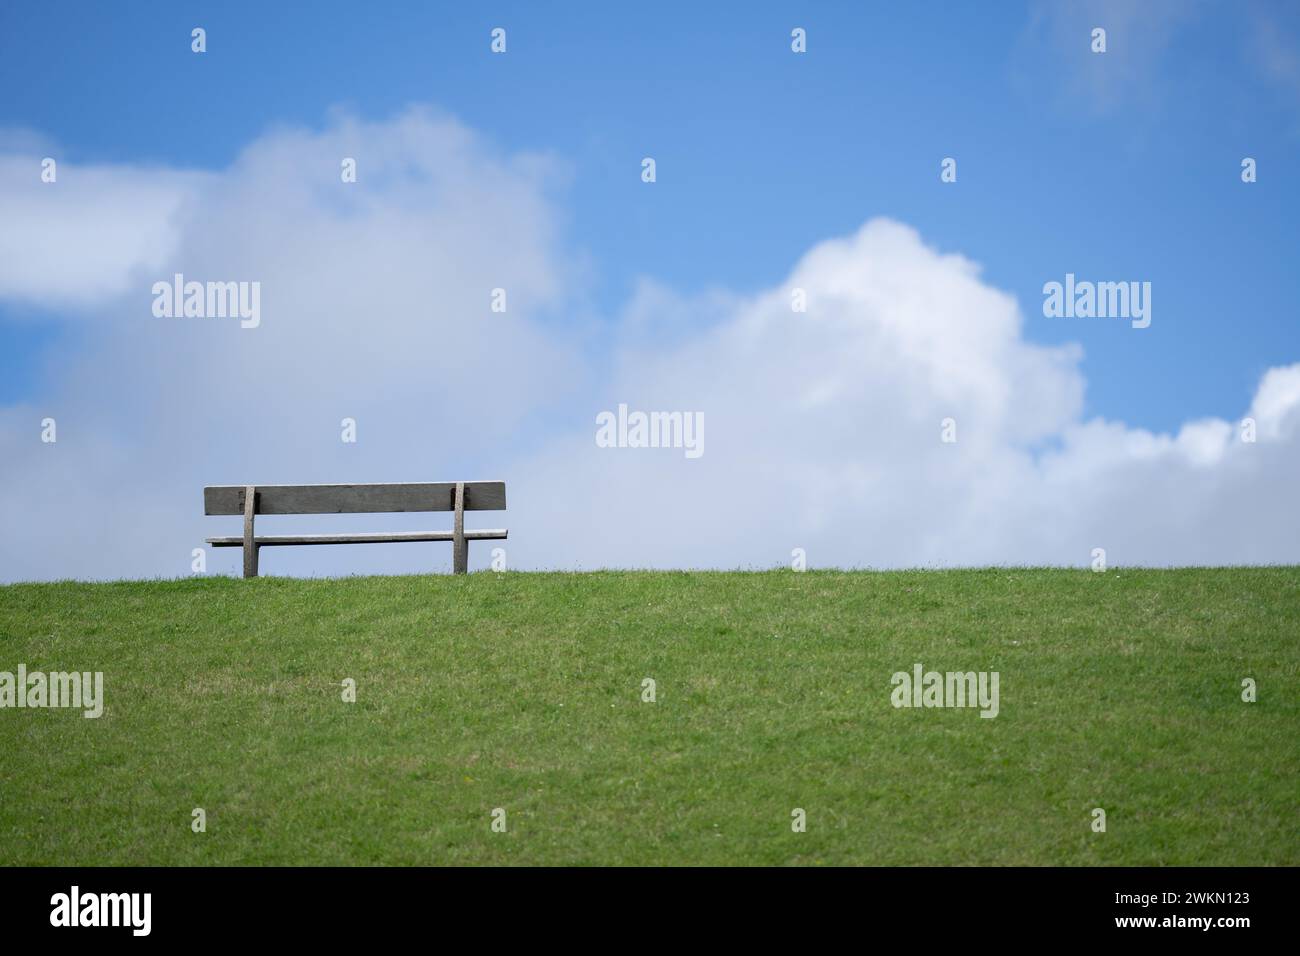 Meditation. Peace meadow. Lonely wooden bench. Peaceful and quiet place. Loneliness. Calm place. Rest and relax. Relaxation concept Stock Photo